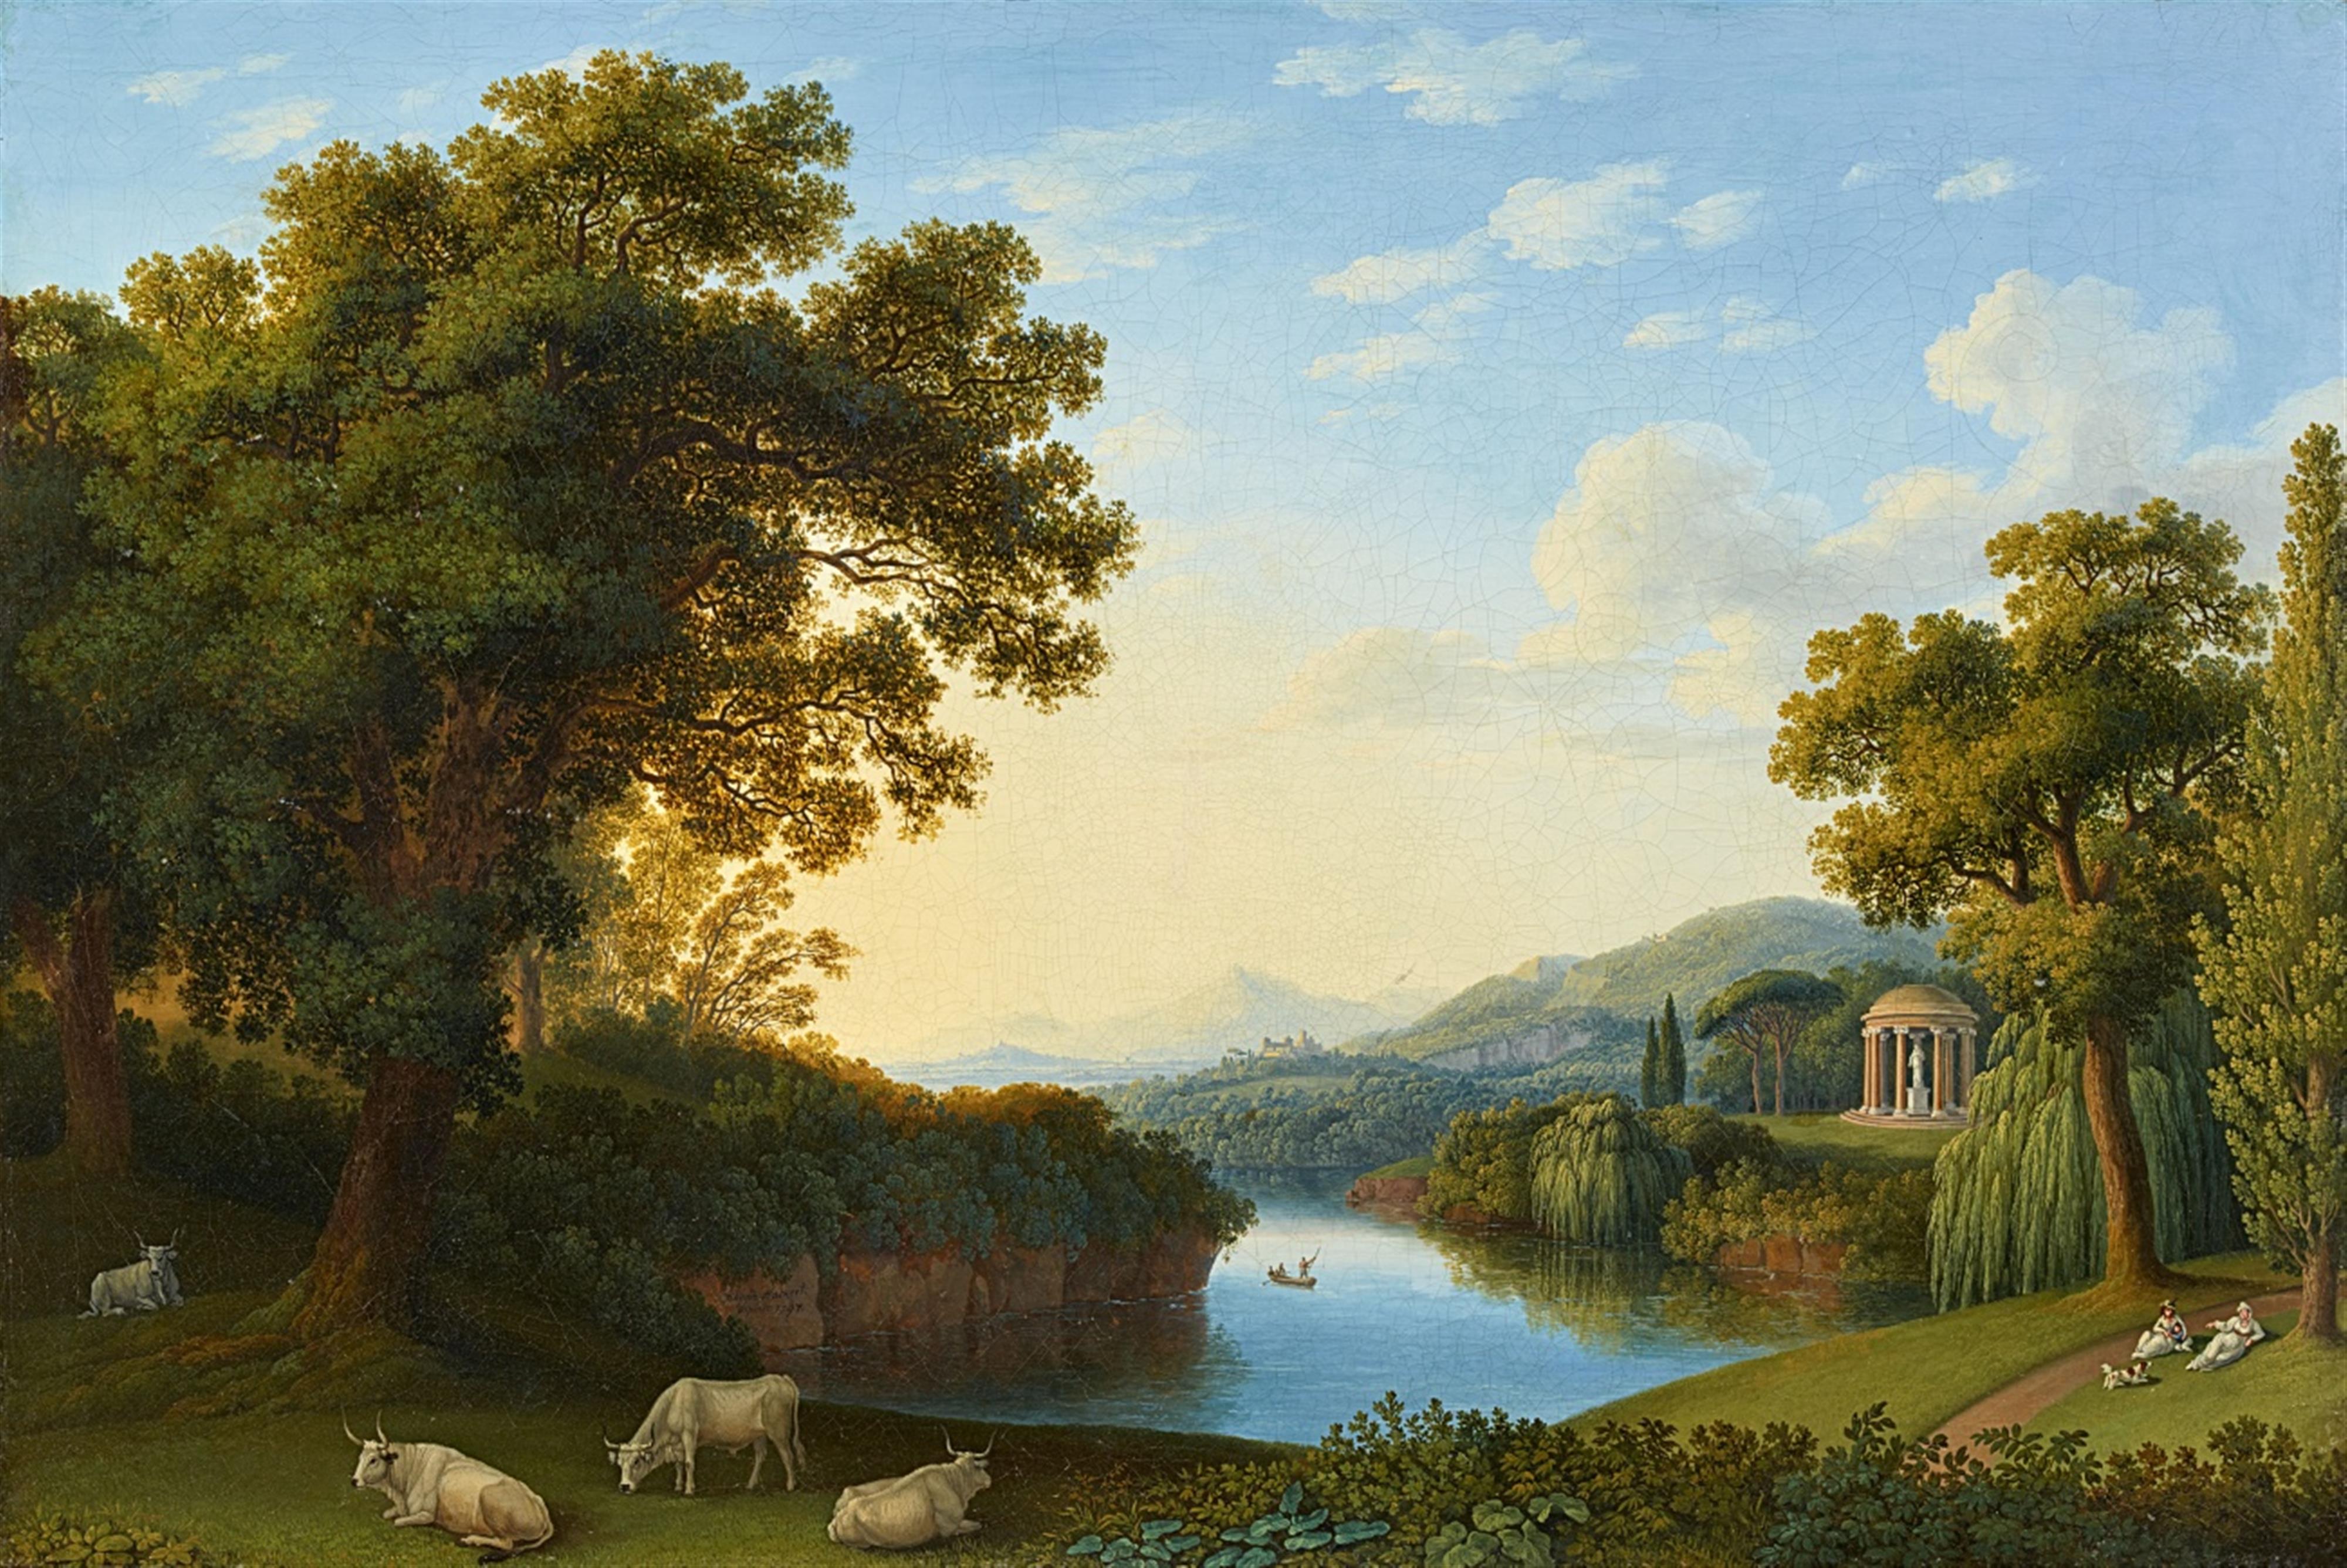 Jacob Philipp Hackert - Landscape with Motifs from the English Garden in Caserta - image-1